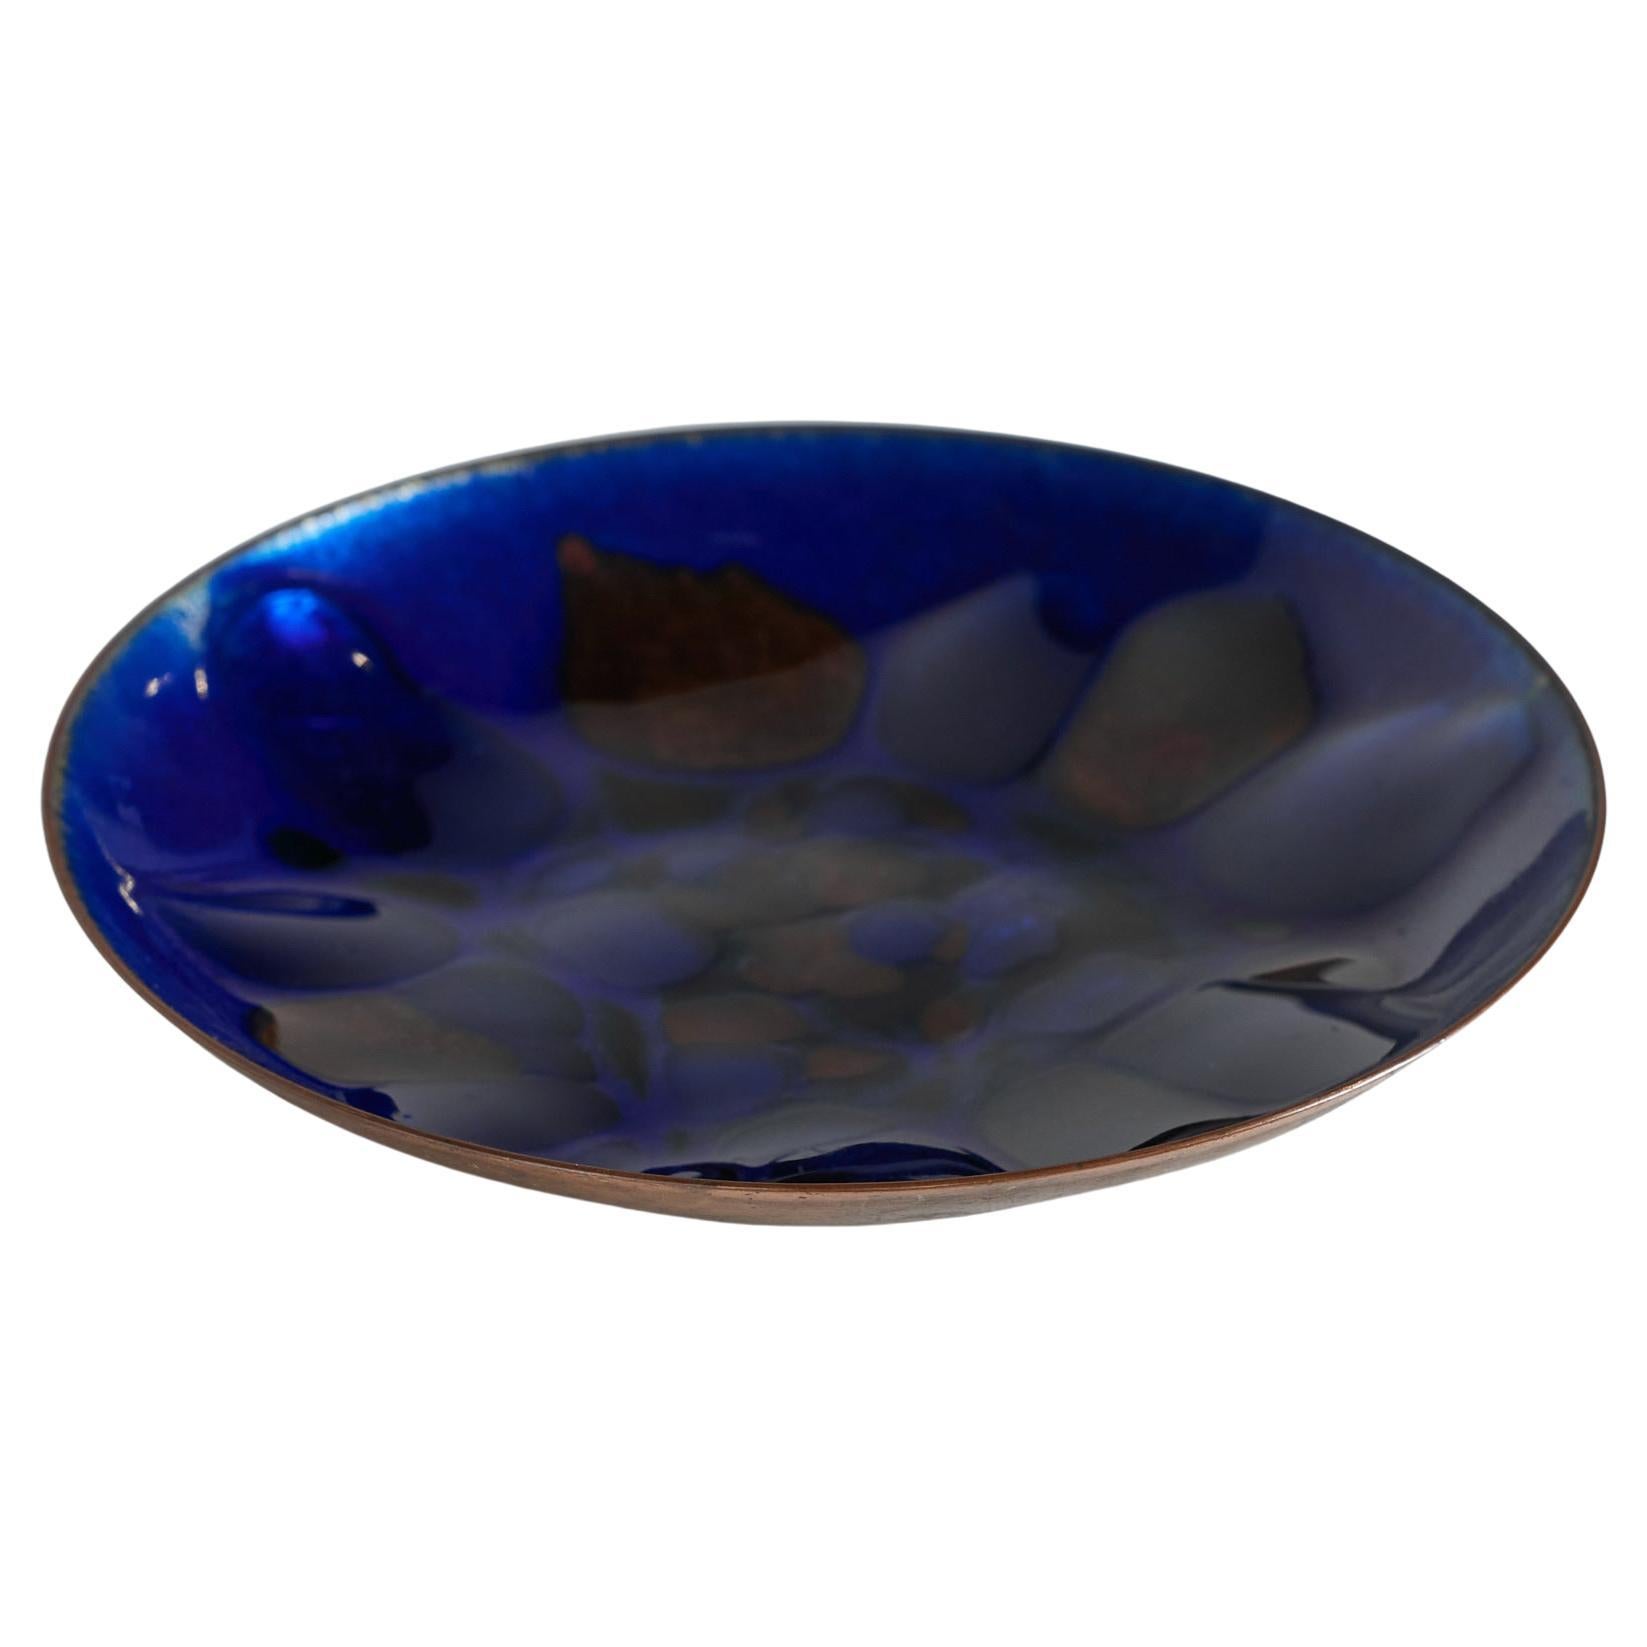 Copper Royal Blue Enameled Plate by Win Ng